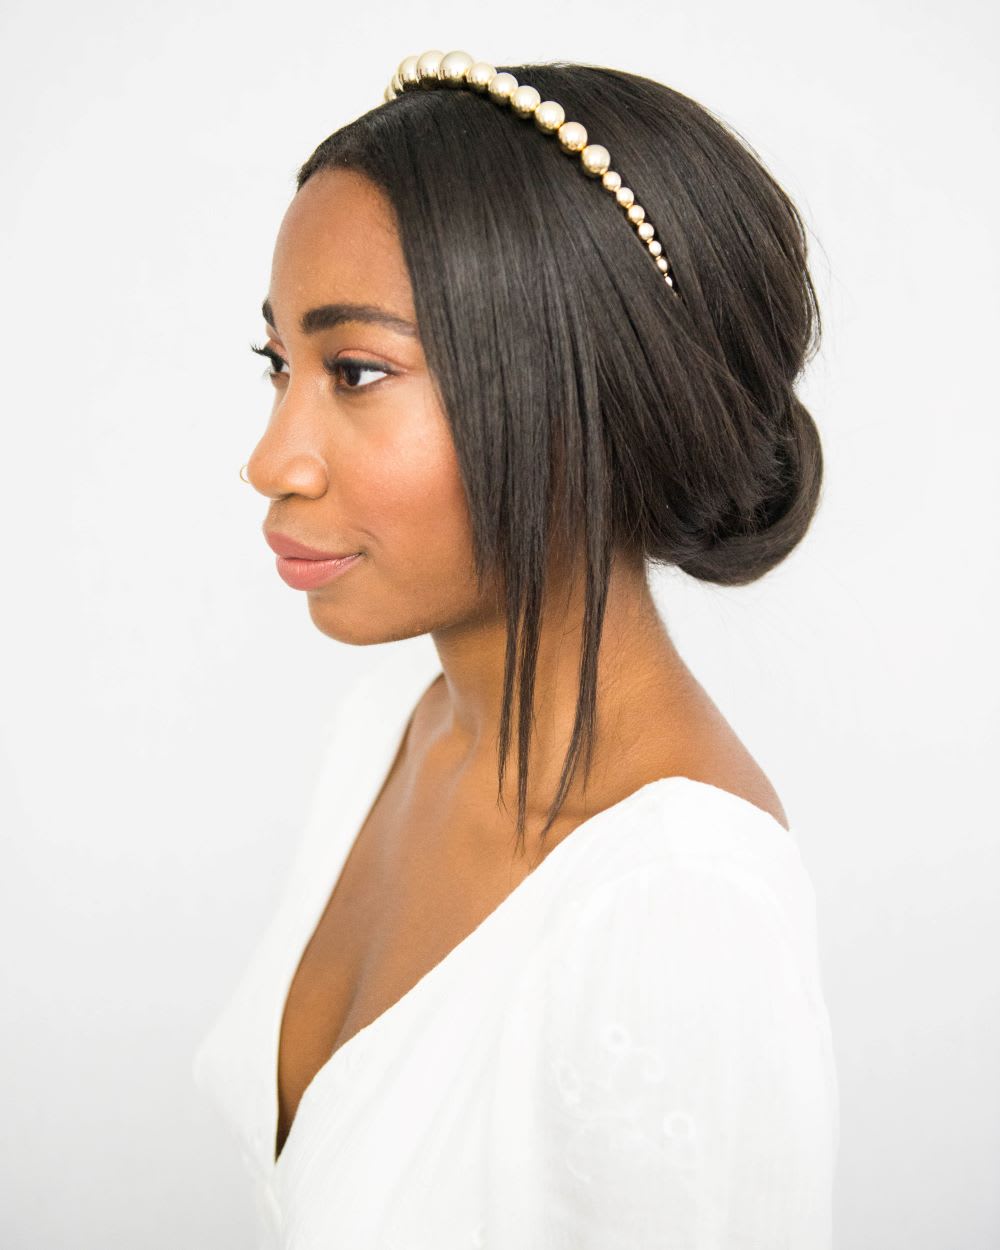 50 Updo Hairstyles for Black Women Ranging from Elegant to Eccentric